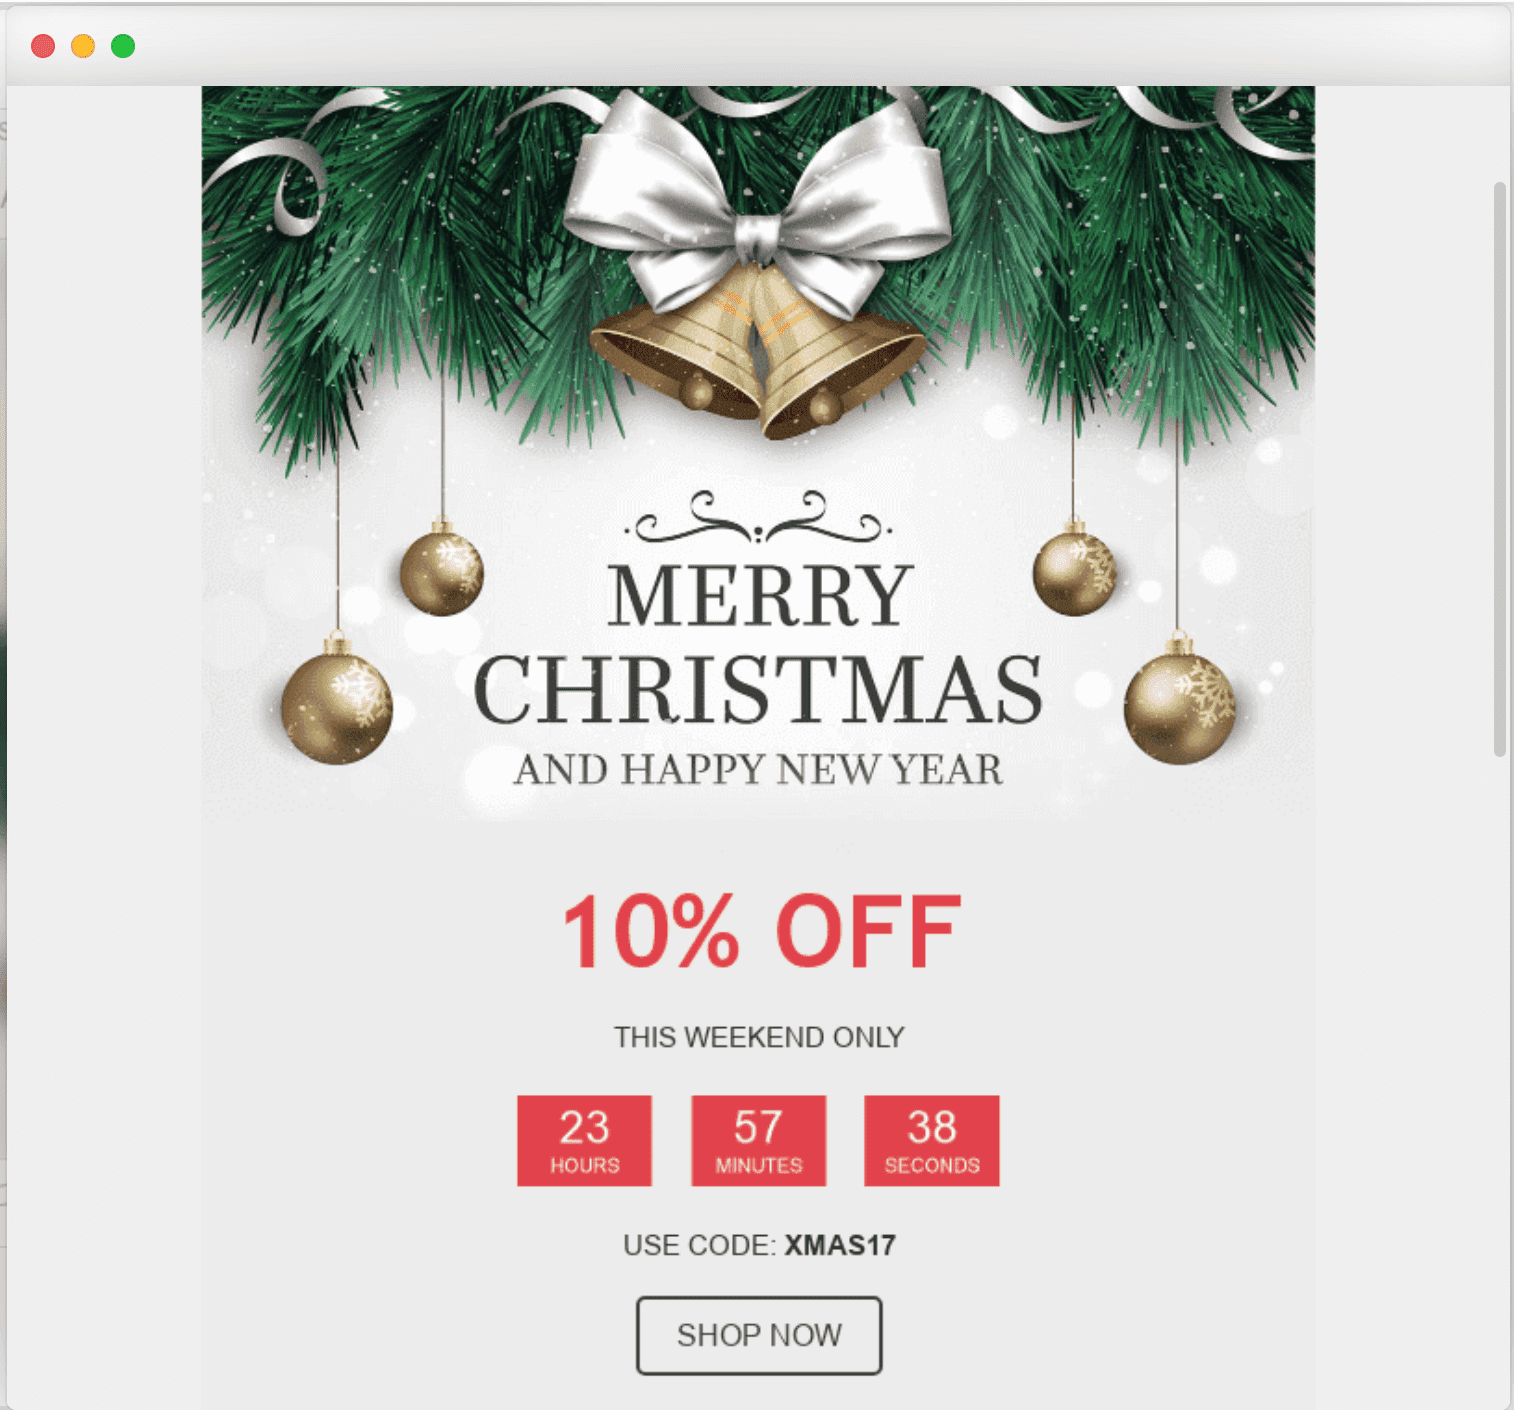 Email Christmas Template with a Countdown Timer